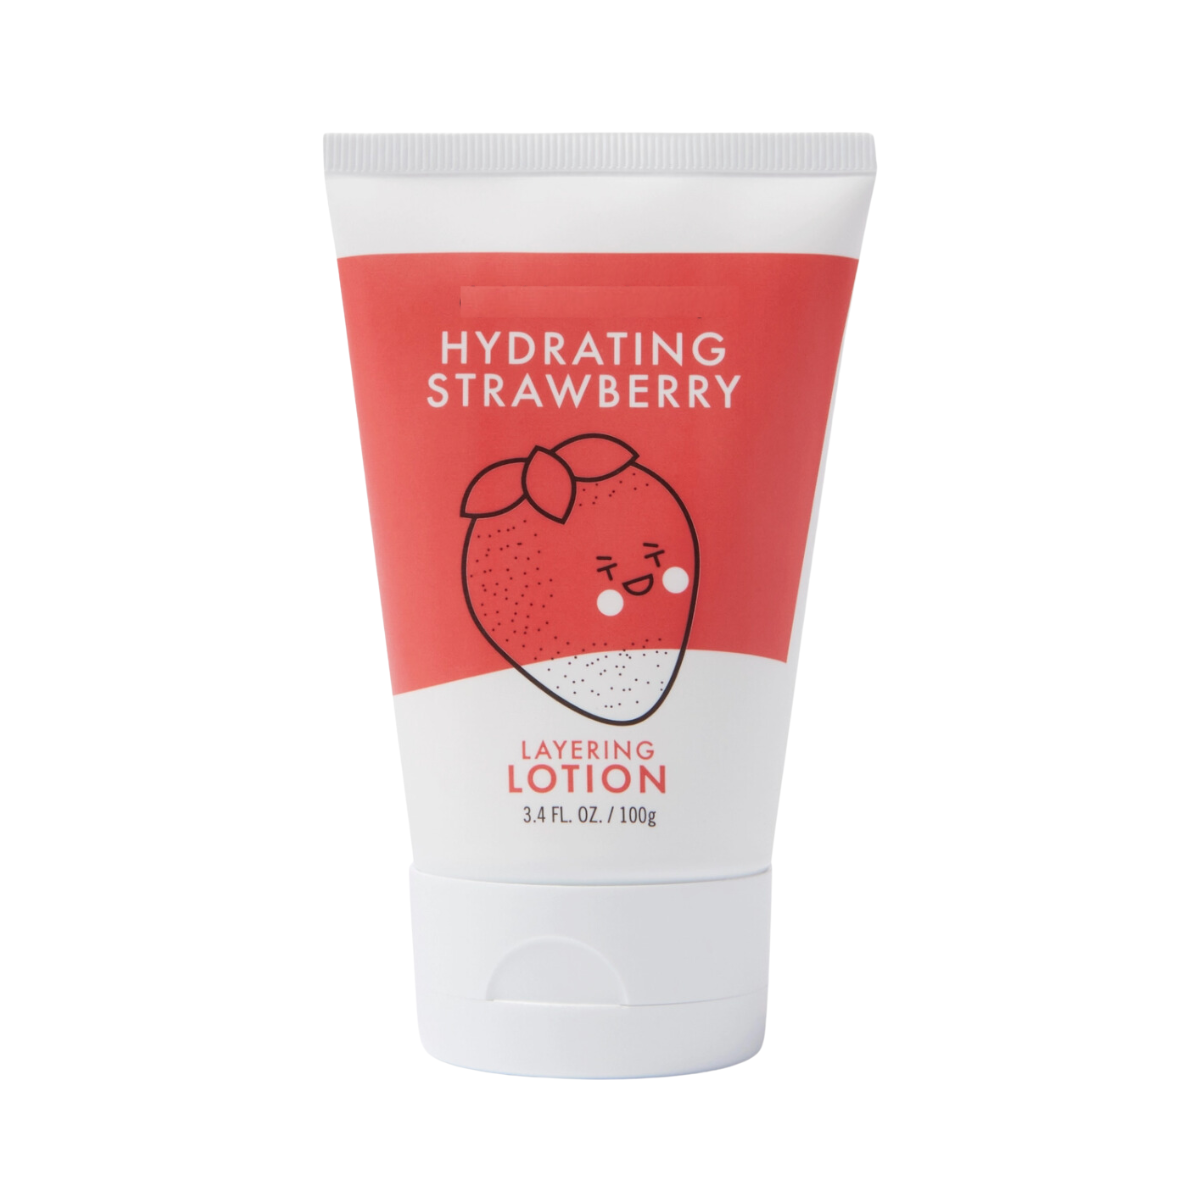 Strawberry Hydrating Lotion for children